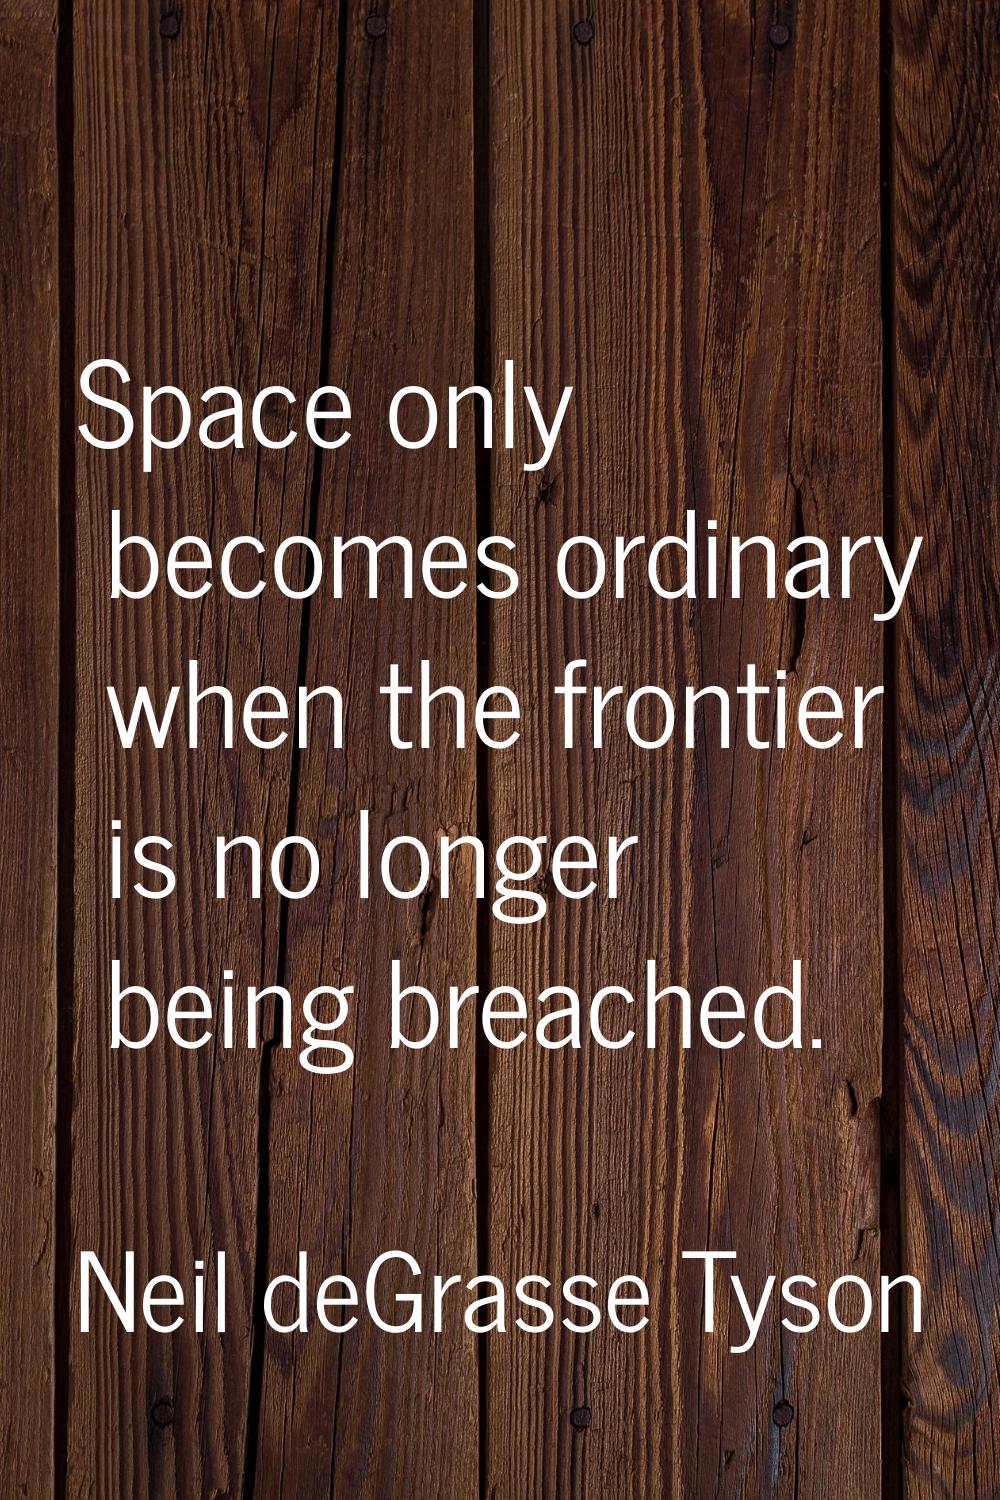 Space only becomes ordinary when the frontier is no longer being breached.